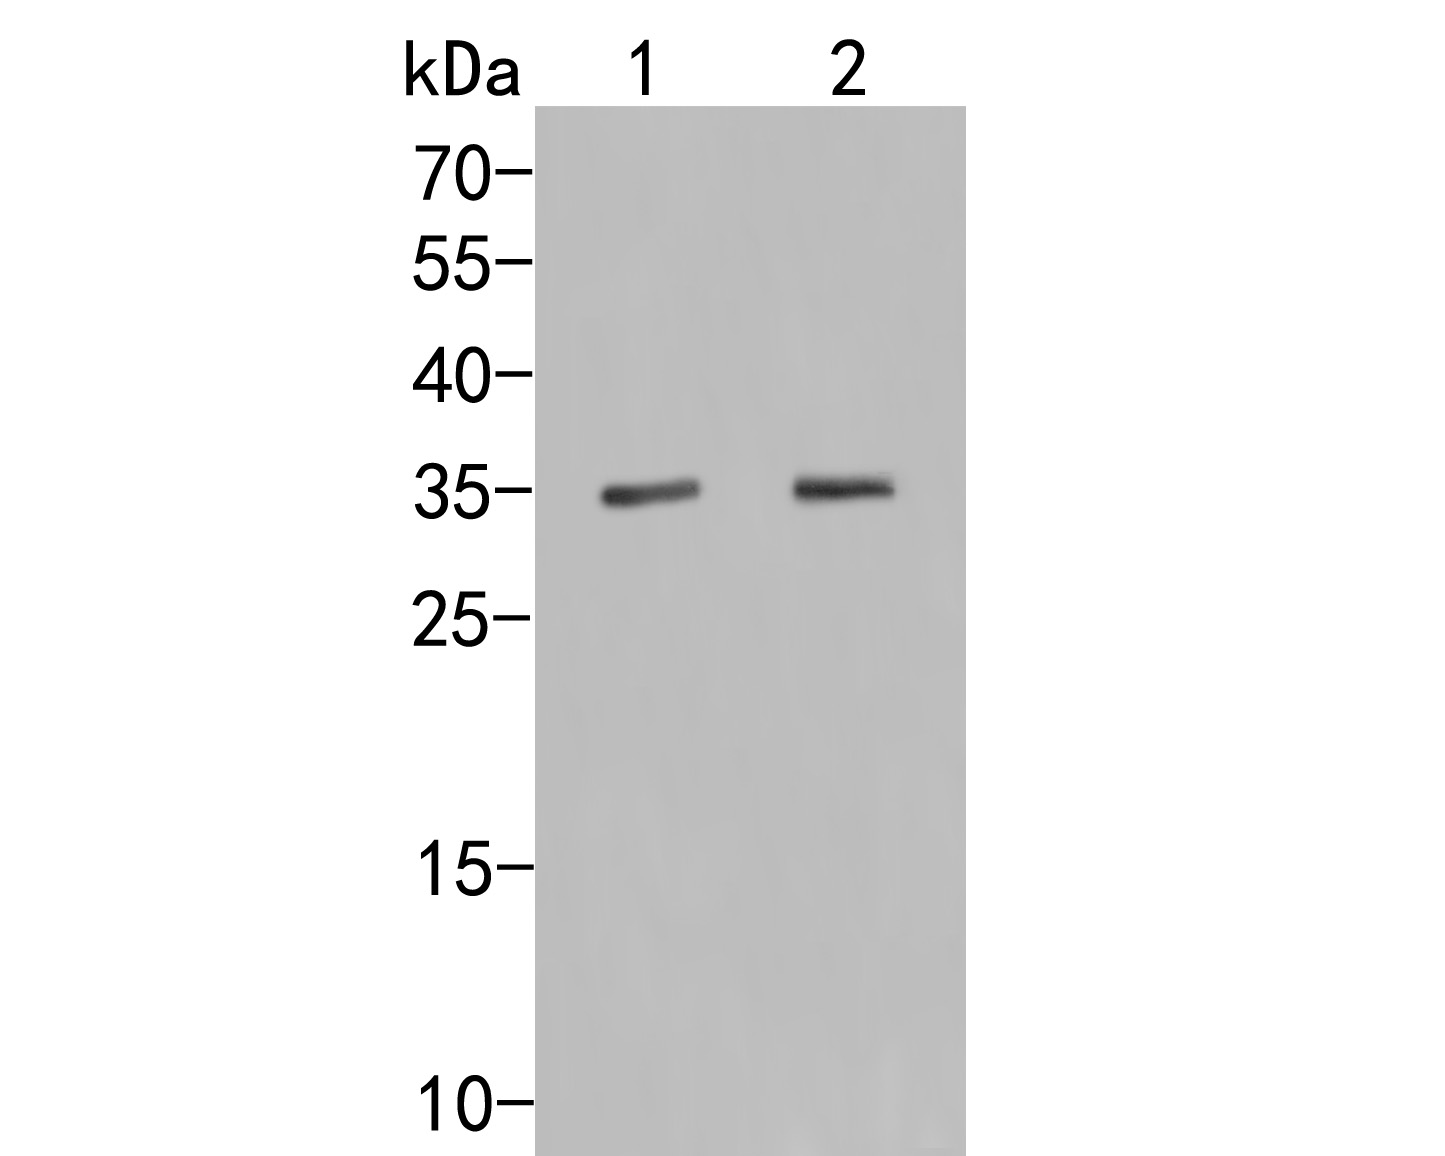 Western blot analysis of Osteopontin on different lysates. Proteins were transferred to a PVDF membrane and blocked with 5% NFDM/TBST for 1 hour at room temperature. The primary antibody (HA500464, 1/500) was used in 5% NFDM/TBST at room temperature for 2 hours. Goat Anti-Rabbit IgG - HRP Secondary Antibody (HA1001) at 1:5,000 dilution was used for 1 hour at room temperature.<br />
Positive control: <br />
Lane 1: Mouse liver tissue lysate<br />
Lane 2: HepG2 cell lysate